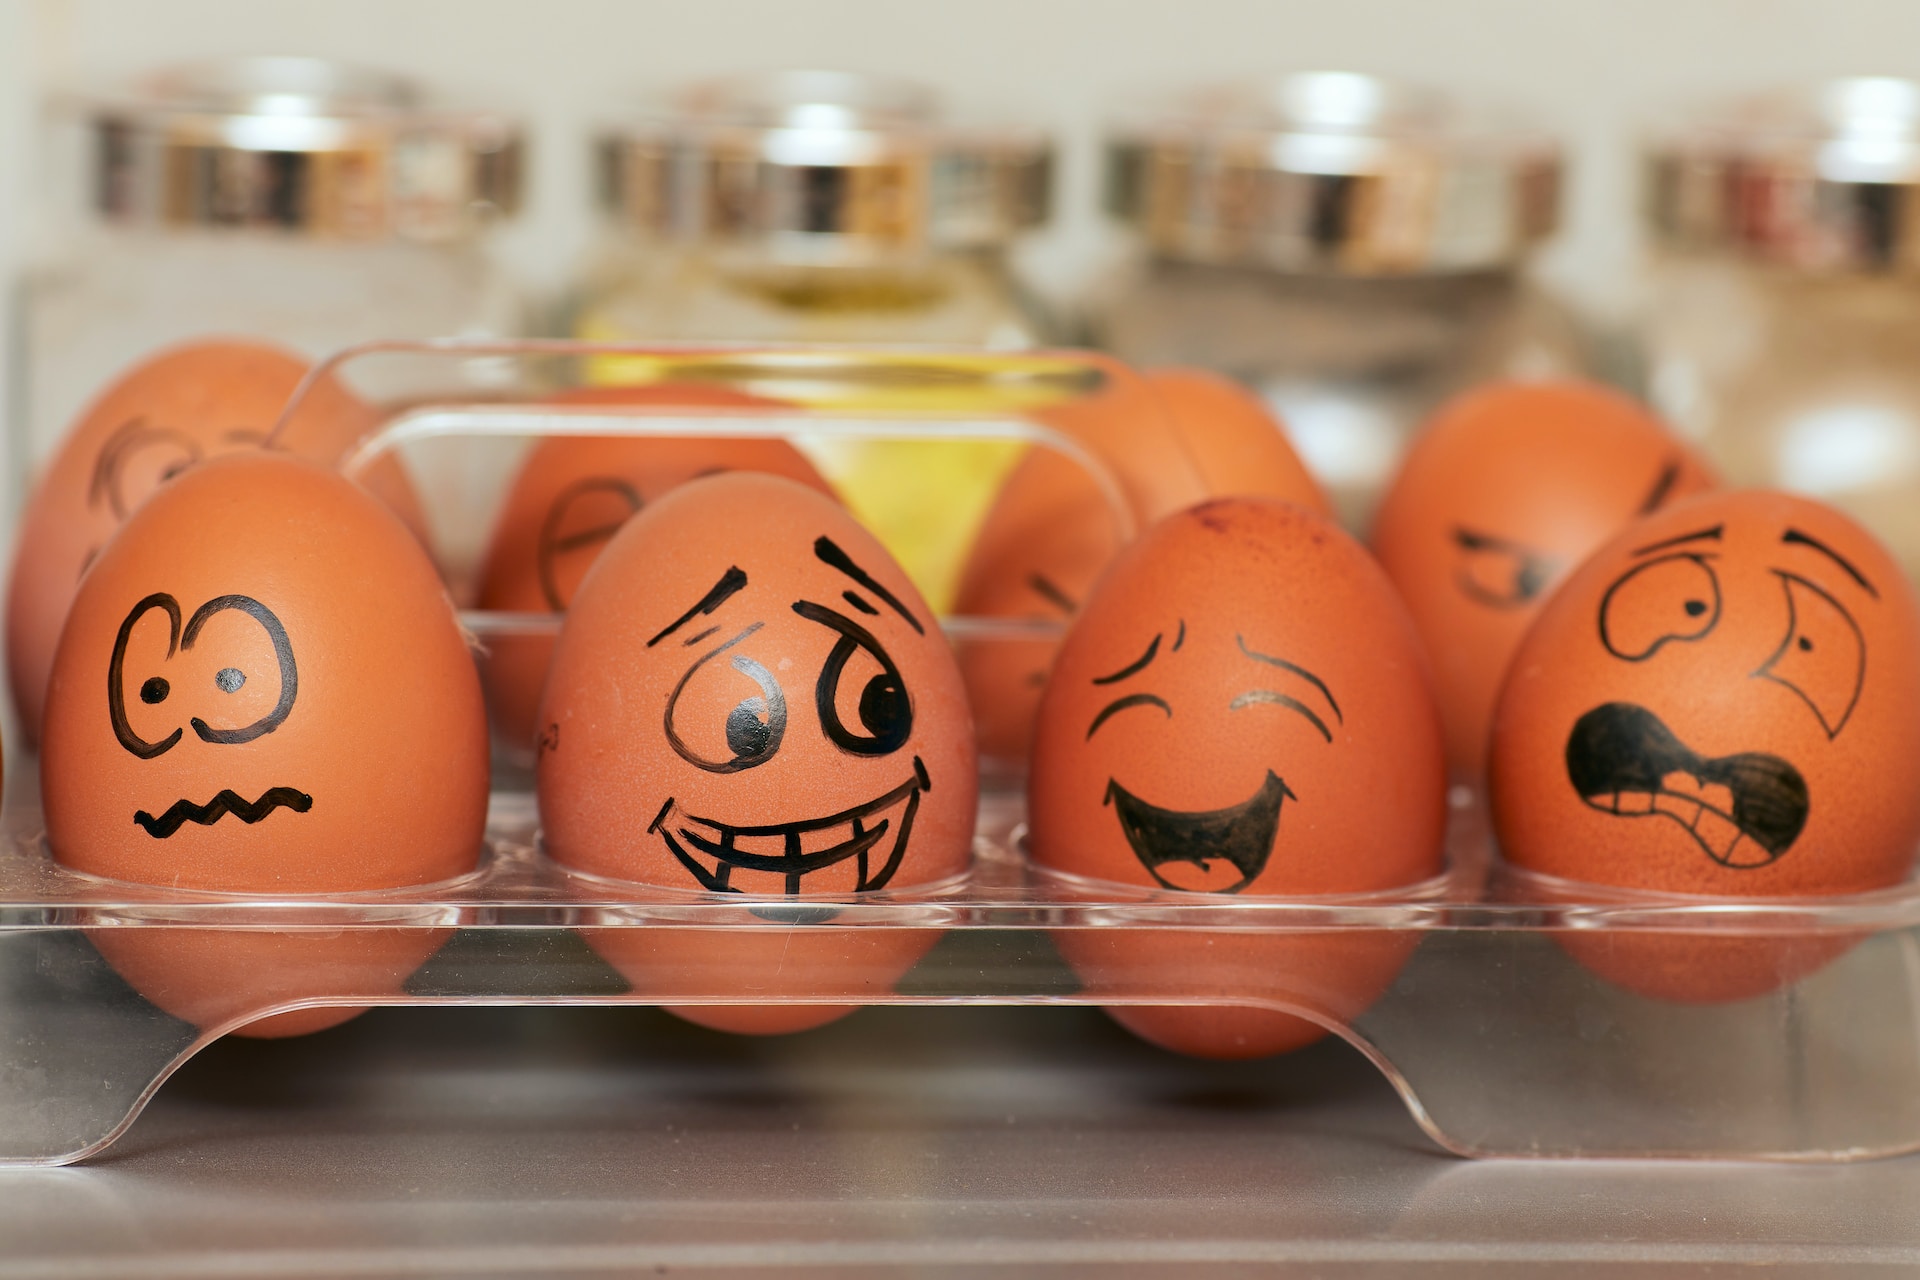 Eggs with emotional faces.